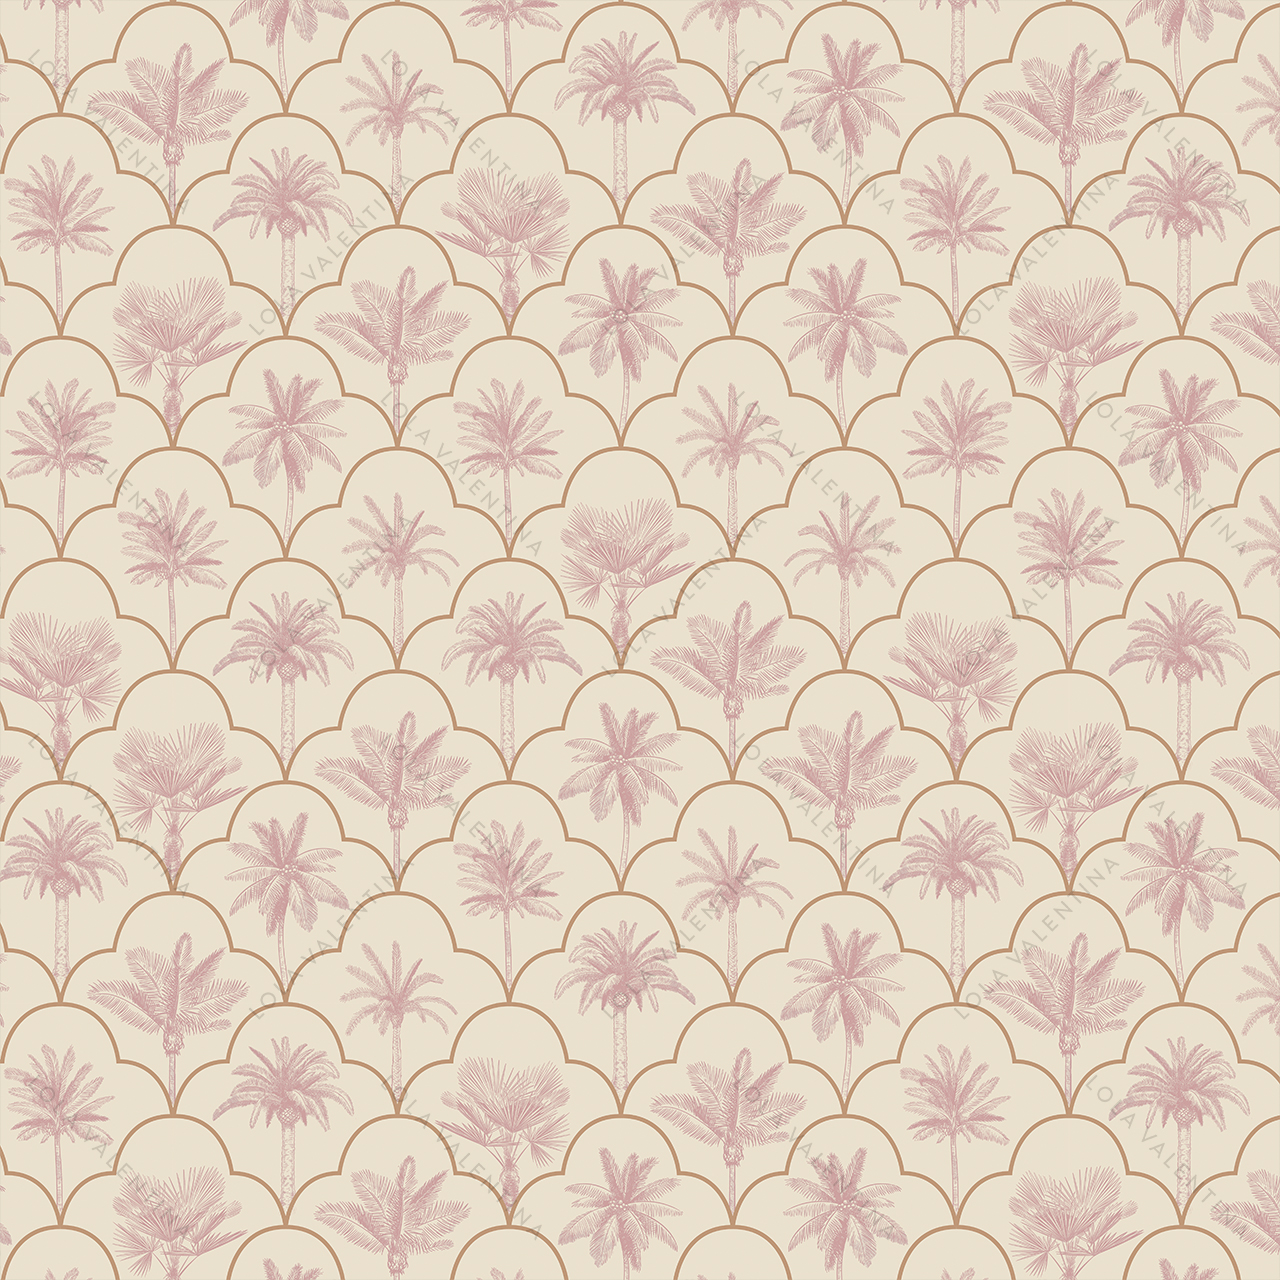 Blush-Ivory-Biscayne-Pattern-30x30-From-Deco-Collection-Lola-Valentina-High-End-Linen-Rental